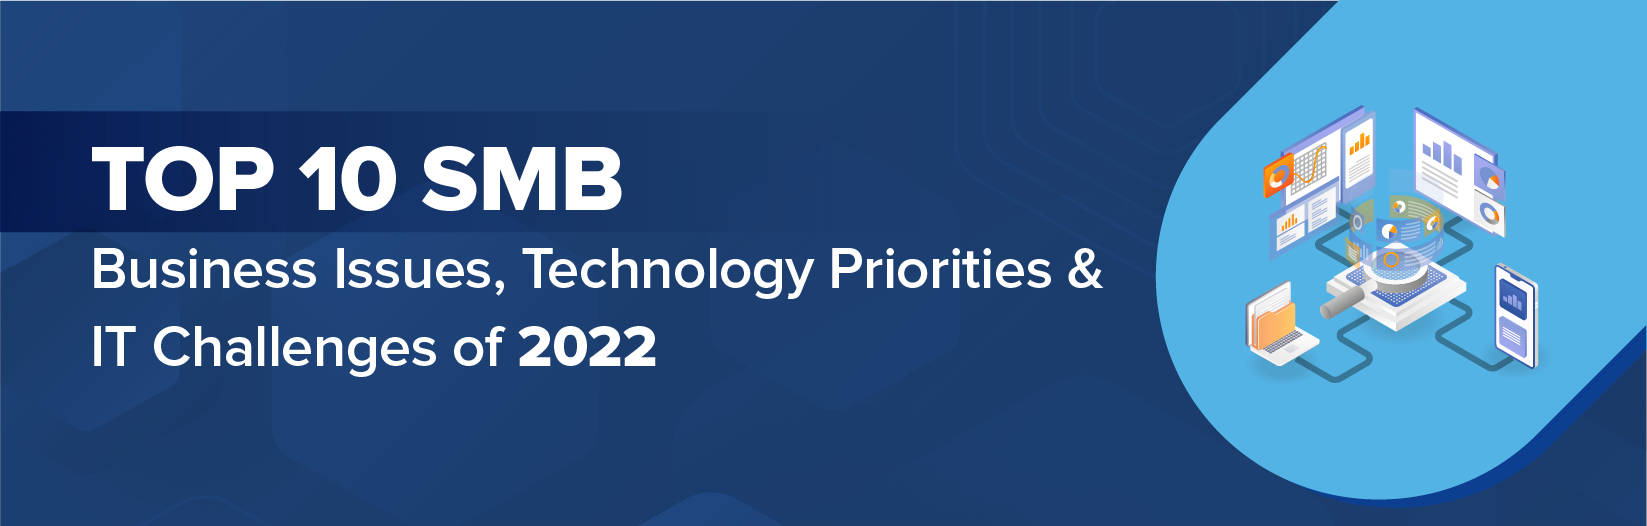 2022 Top 10 SMB - Business Issues, IT Priorities, IT Challenges Infographic